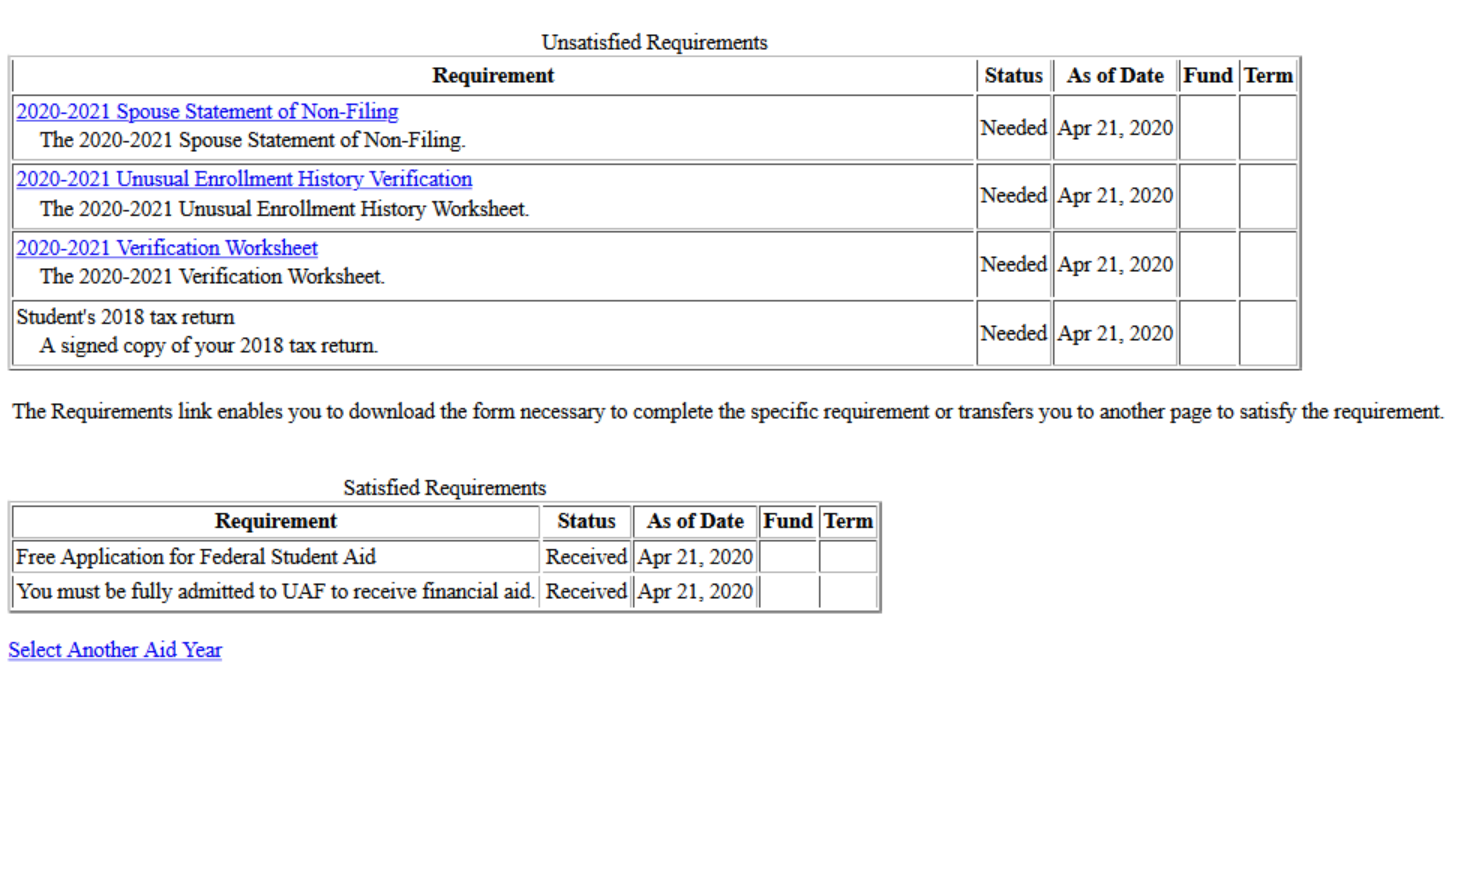 Screenshot of unsatisfied requirements for Financial Aid in UAOnline.